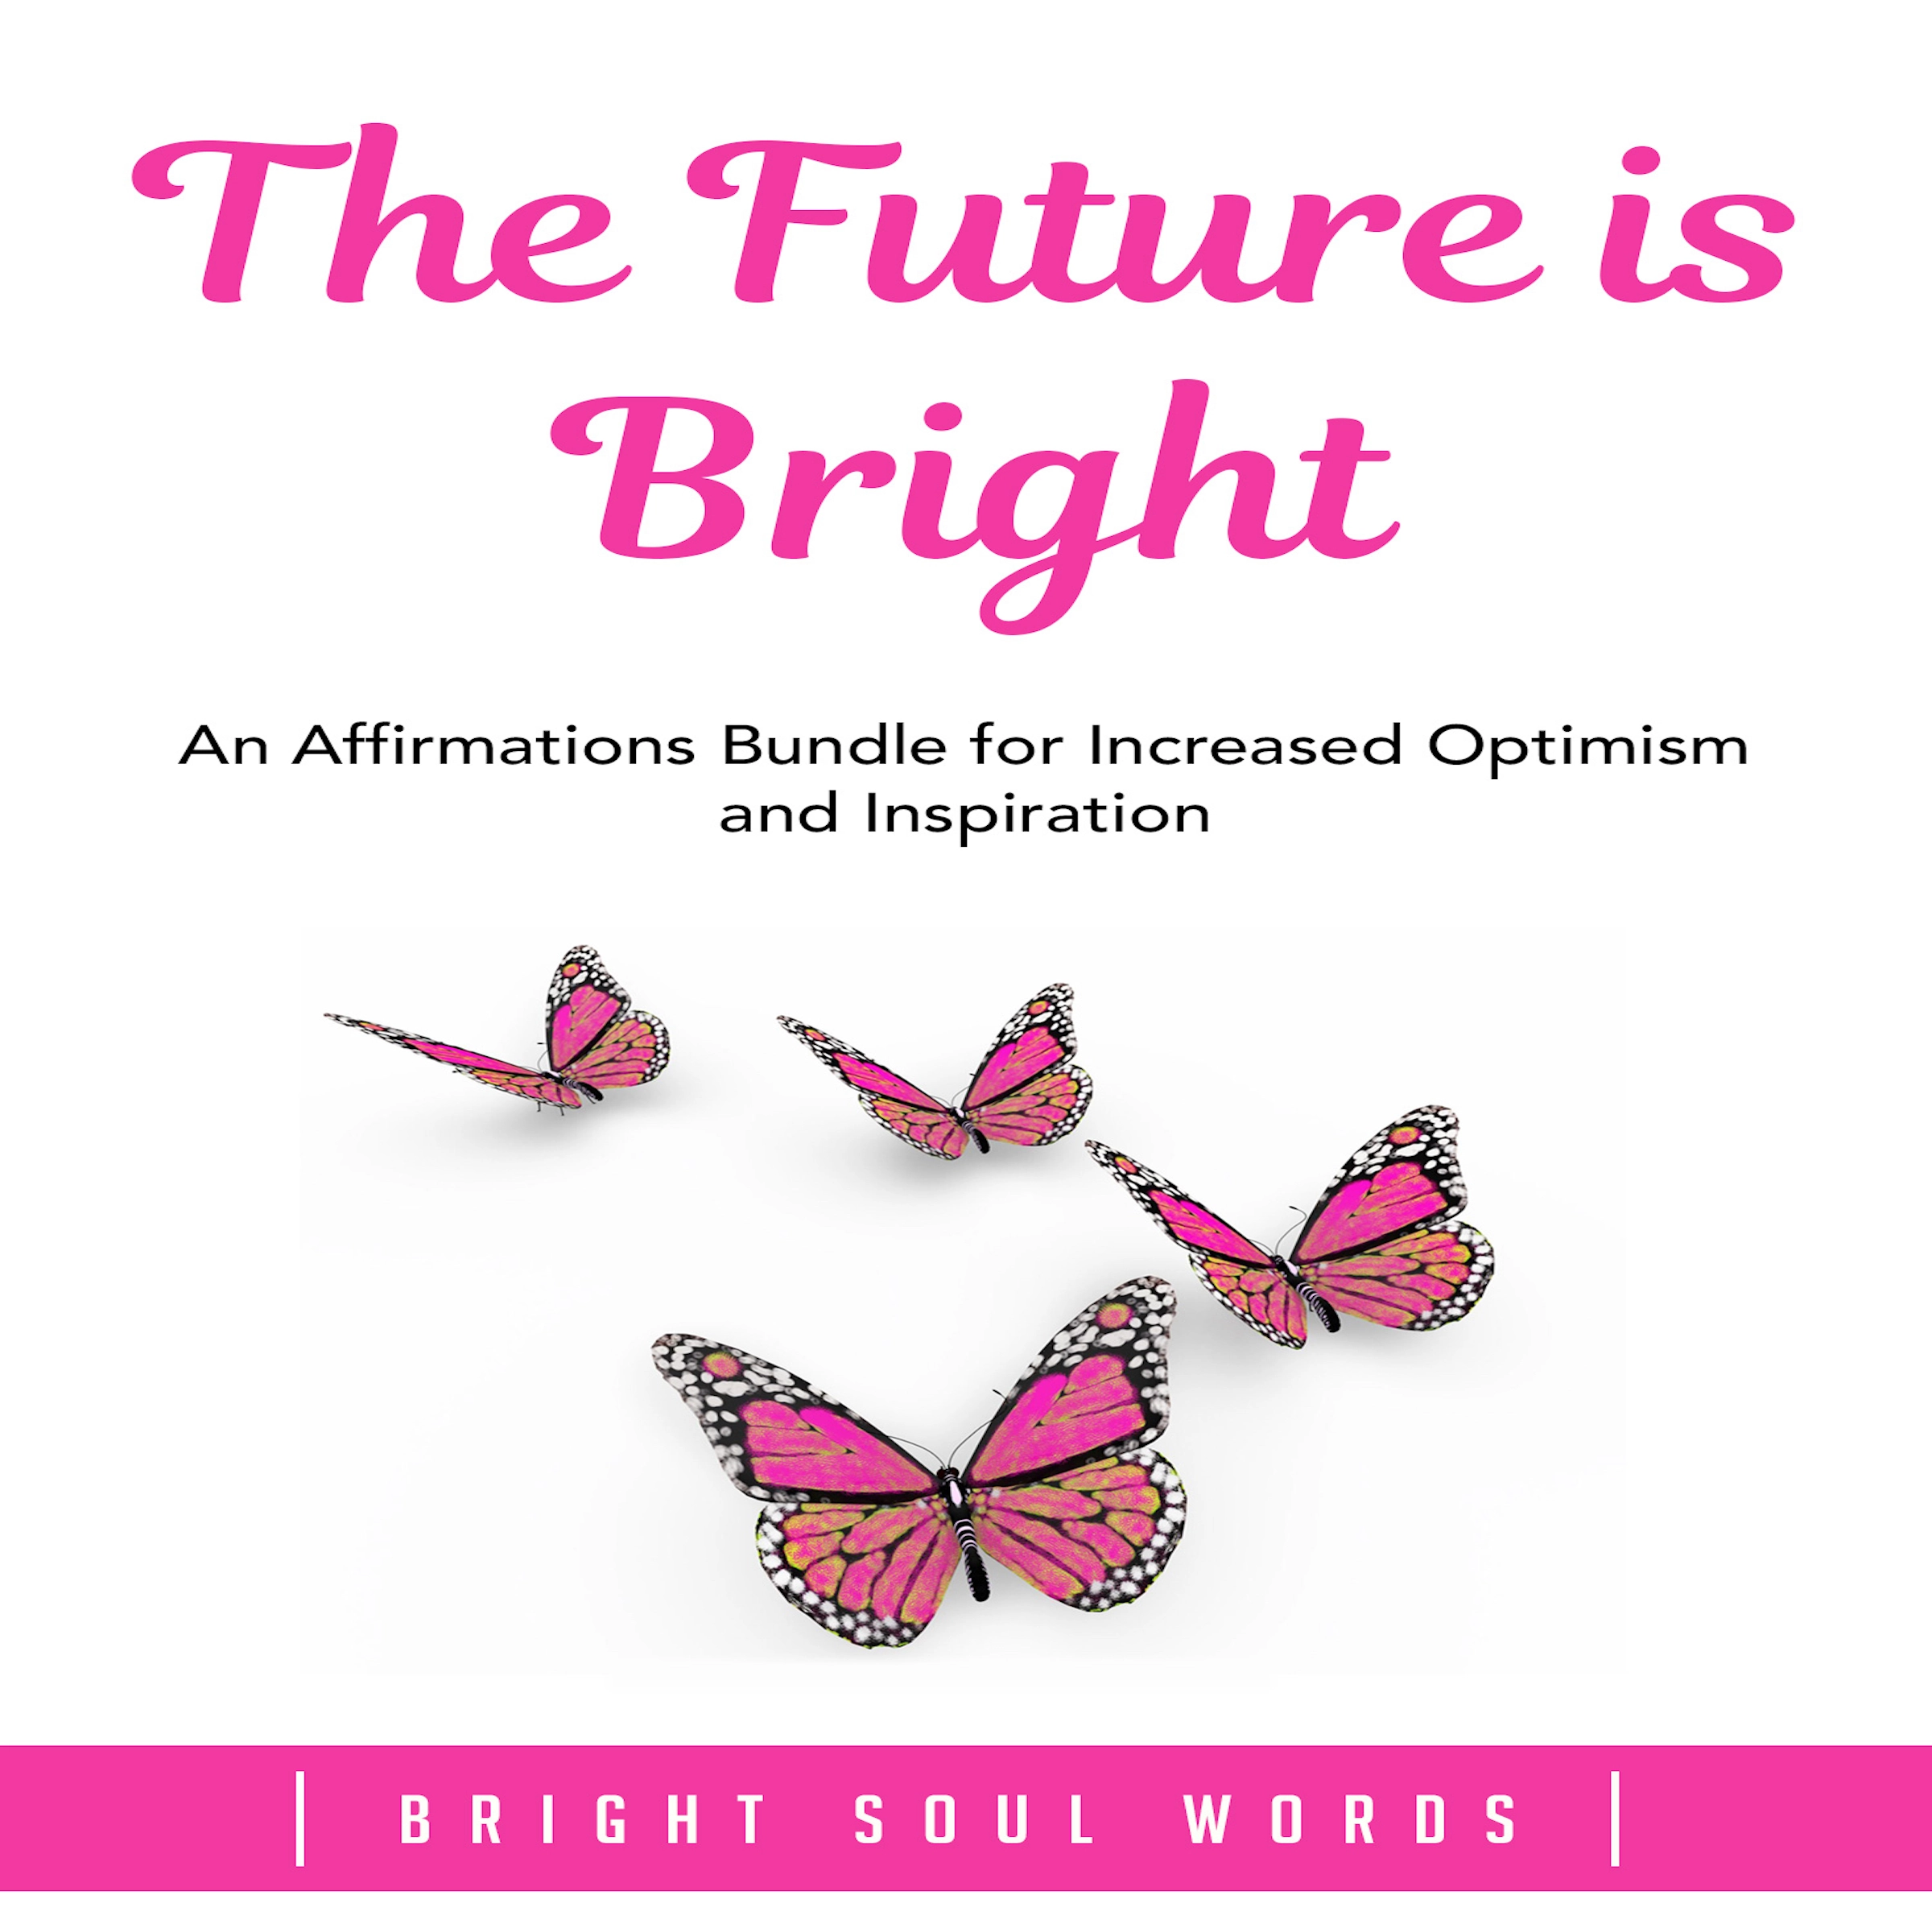 The Future is Bright: An Affirmations Bundle for Increased Optimism and Inspiration Audiobook by Bright Soul Words